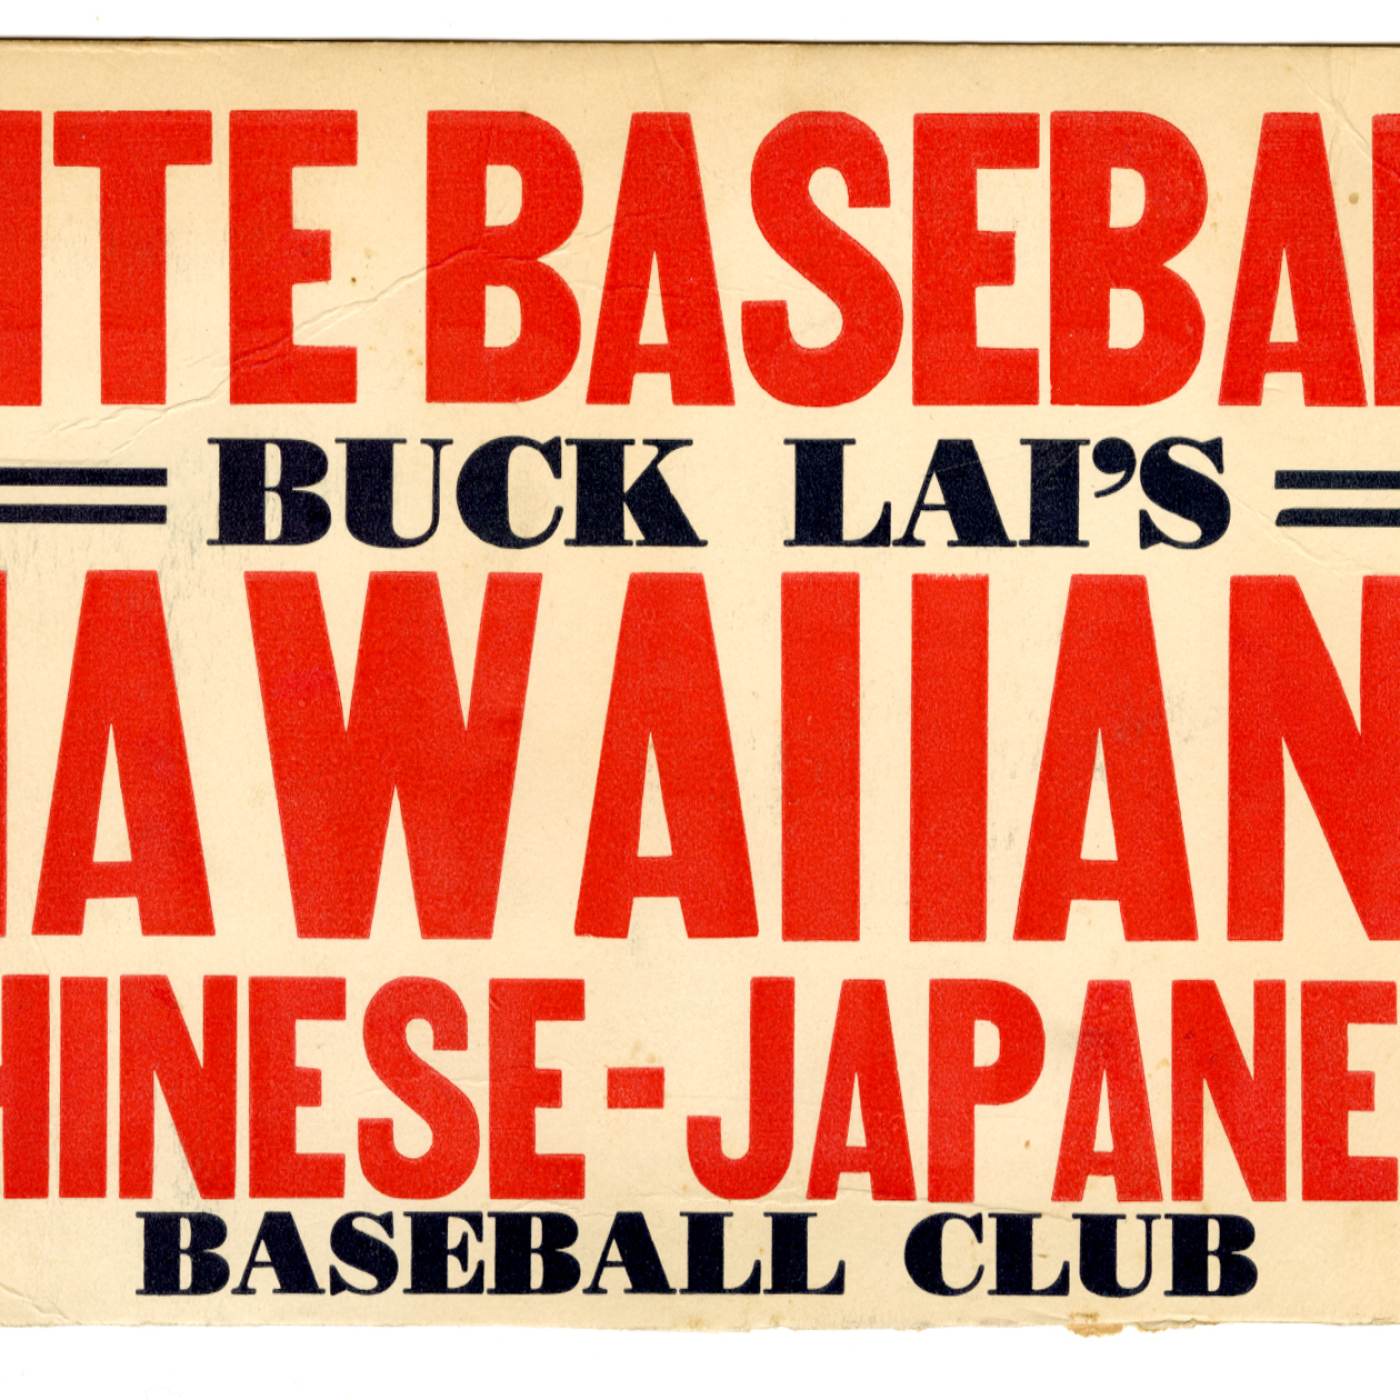 2020.012.001 Night Baseball Buck Lai's Hawaiians Chinese-Japanese Baseball Club. Courtesy of Roy Delbyck, Museum of Chinese in America (MOCA) Collection.